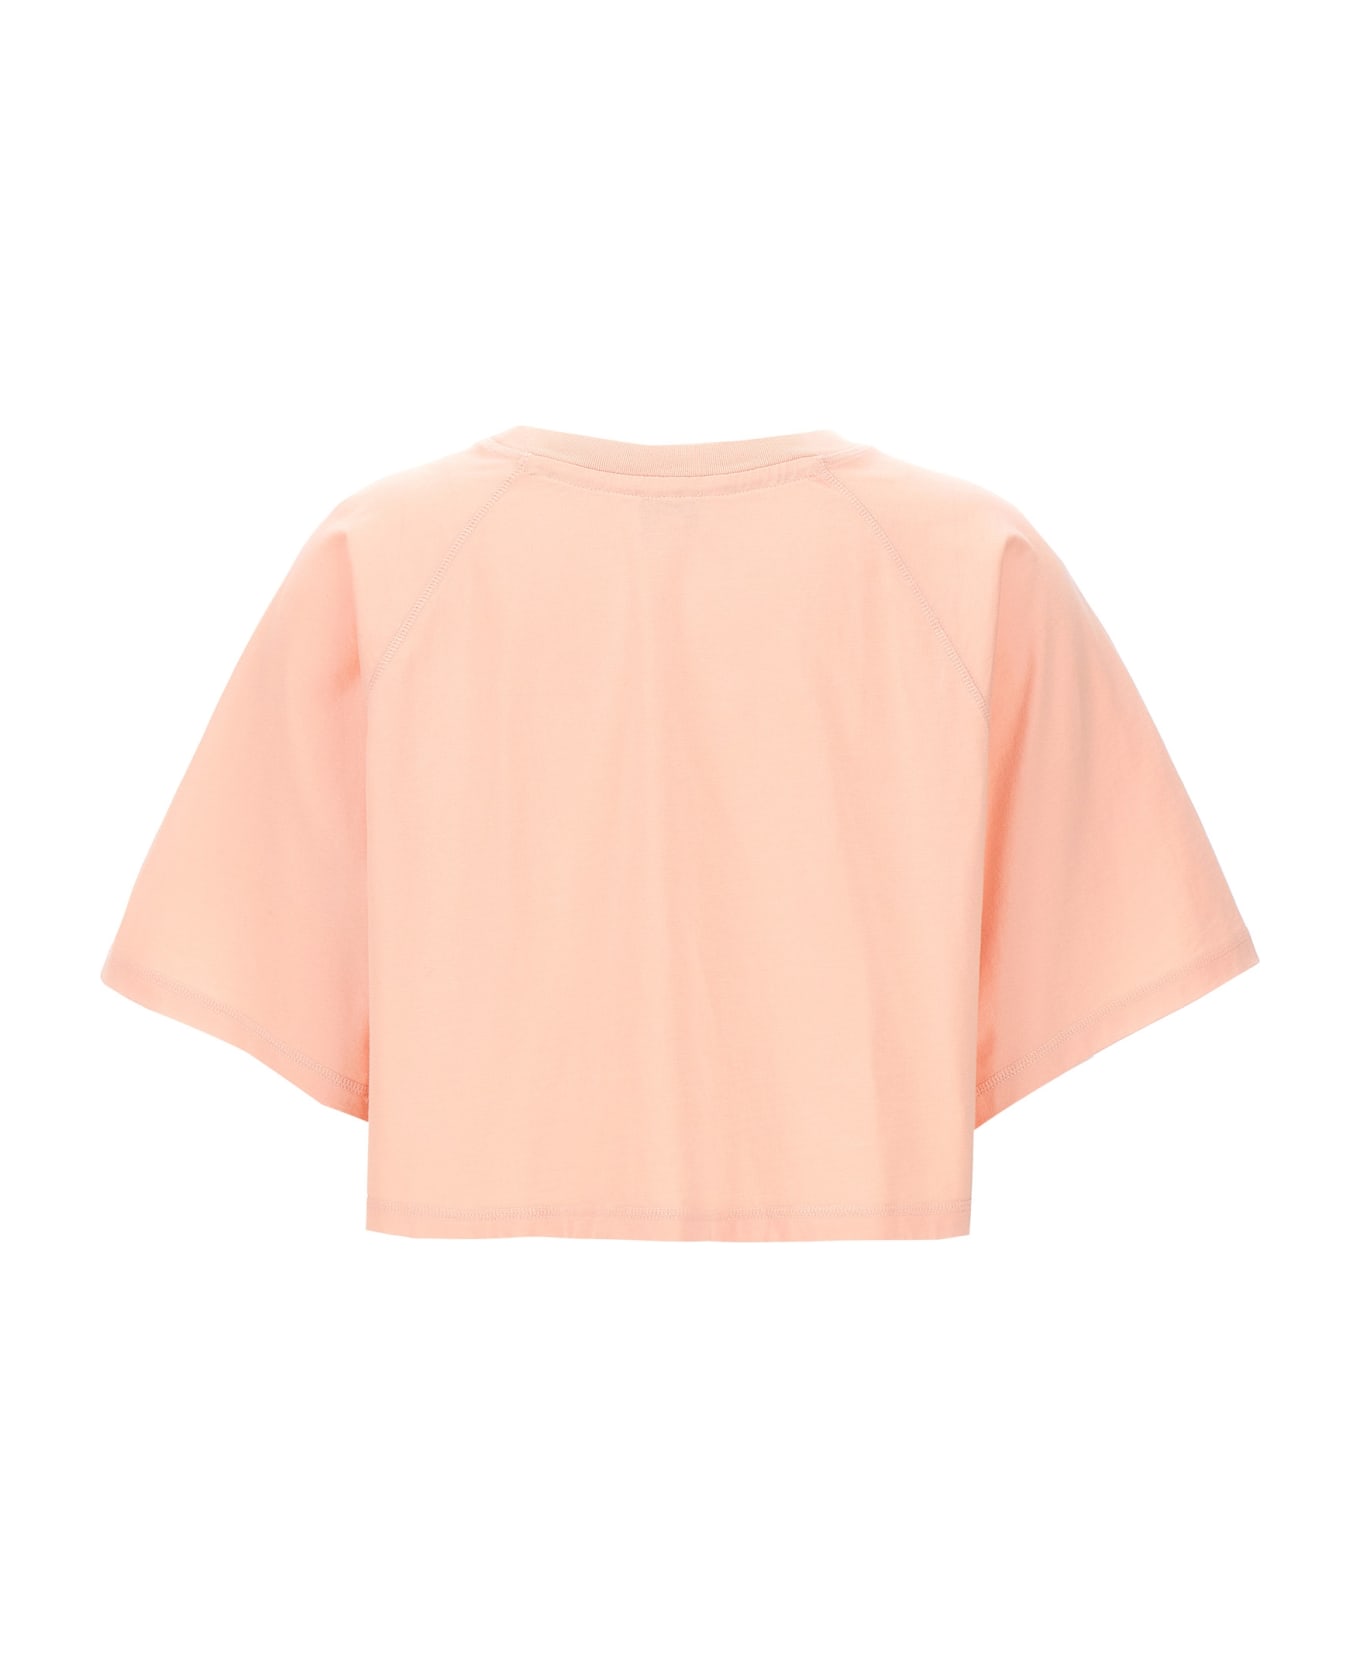 Kenzo Cropped T-shirt - Faded pink